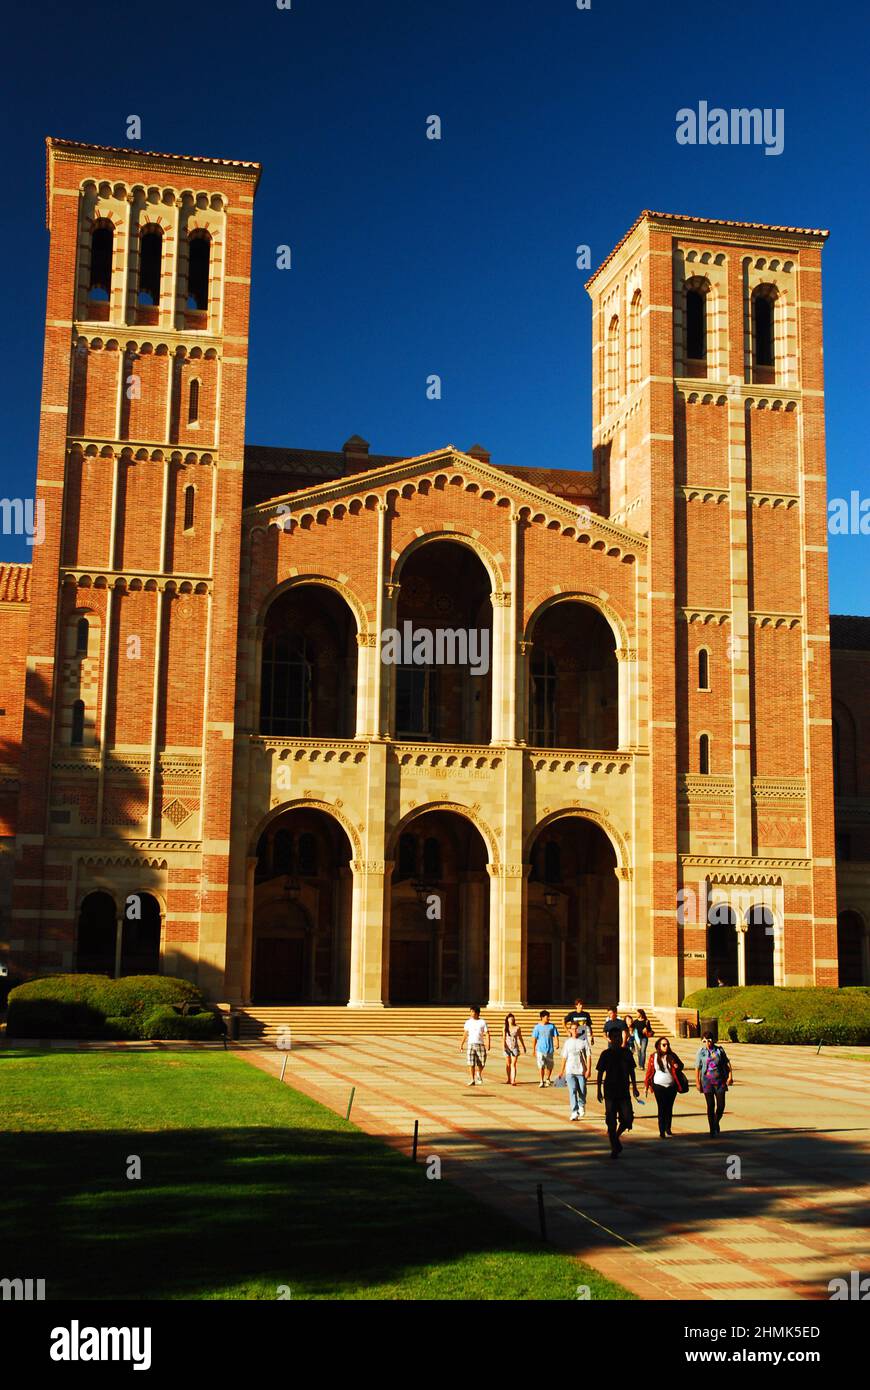 Students walk on the main quad of the campus of UCLA, heading towards the historic Royce Hall, the main theater at the university Stock Photo